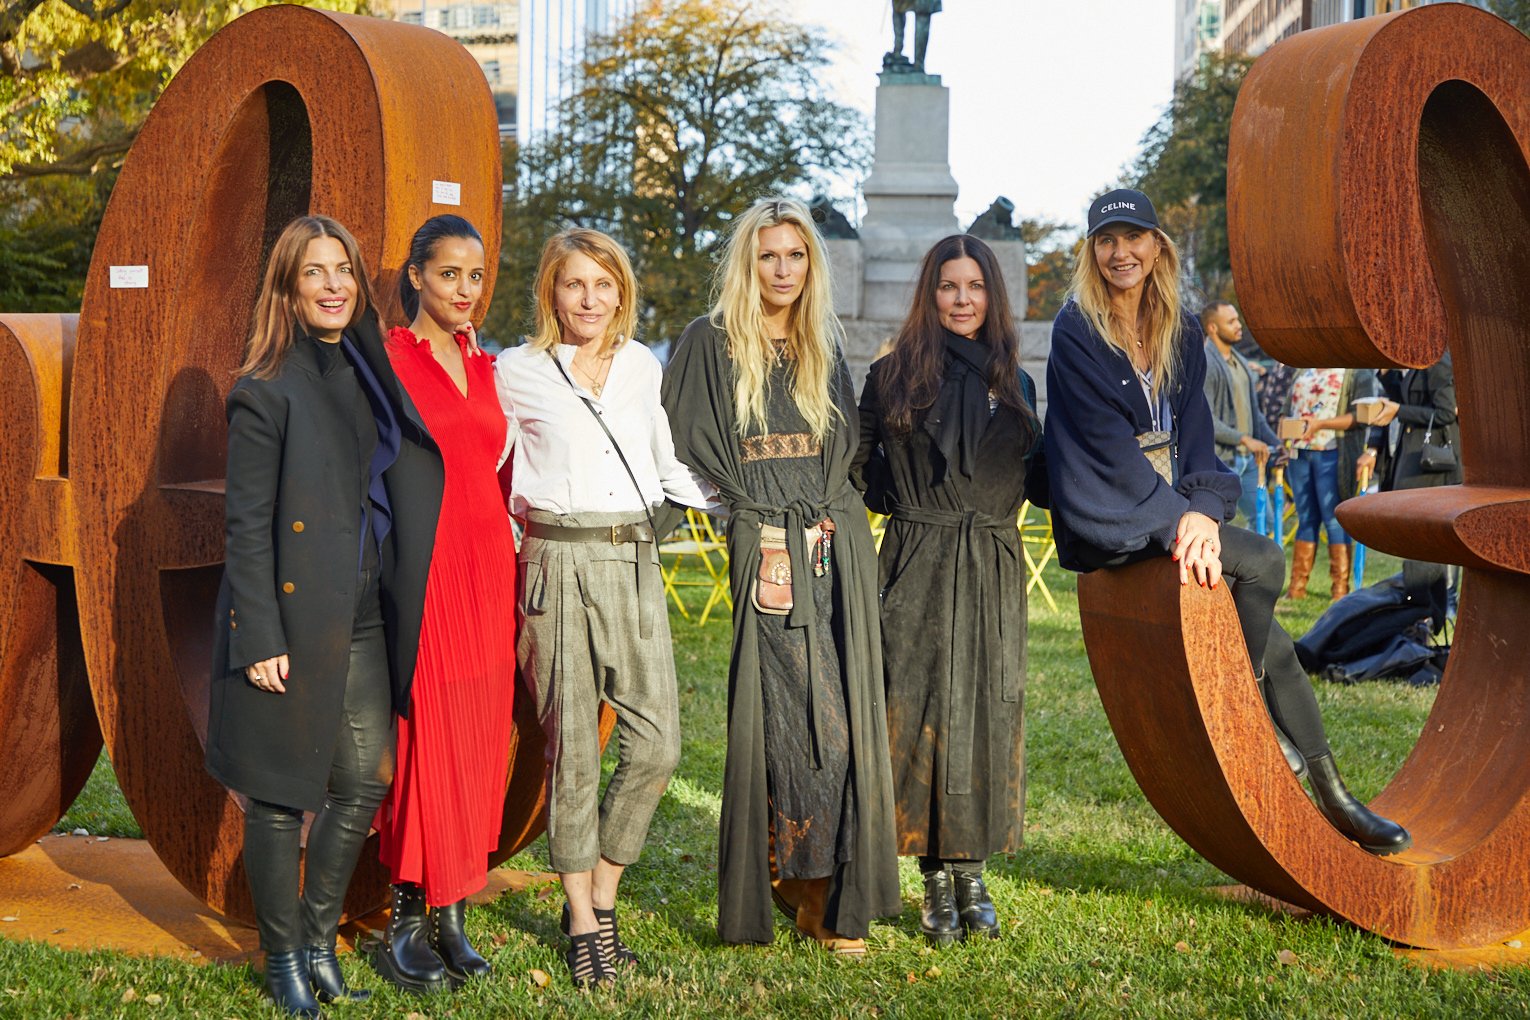 Annette Kröber-Riel, Sawsan Chebli, Kimberly Marteau Emerson, Mia Florentine Weiss, Karen Roth, and Sue Giers in Farragut Square, DC